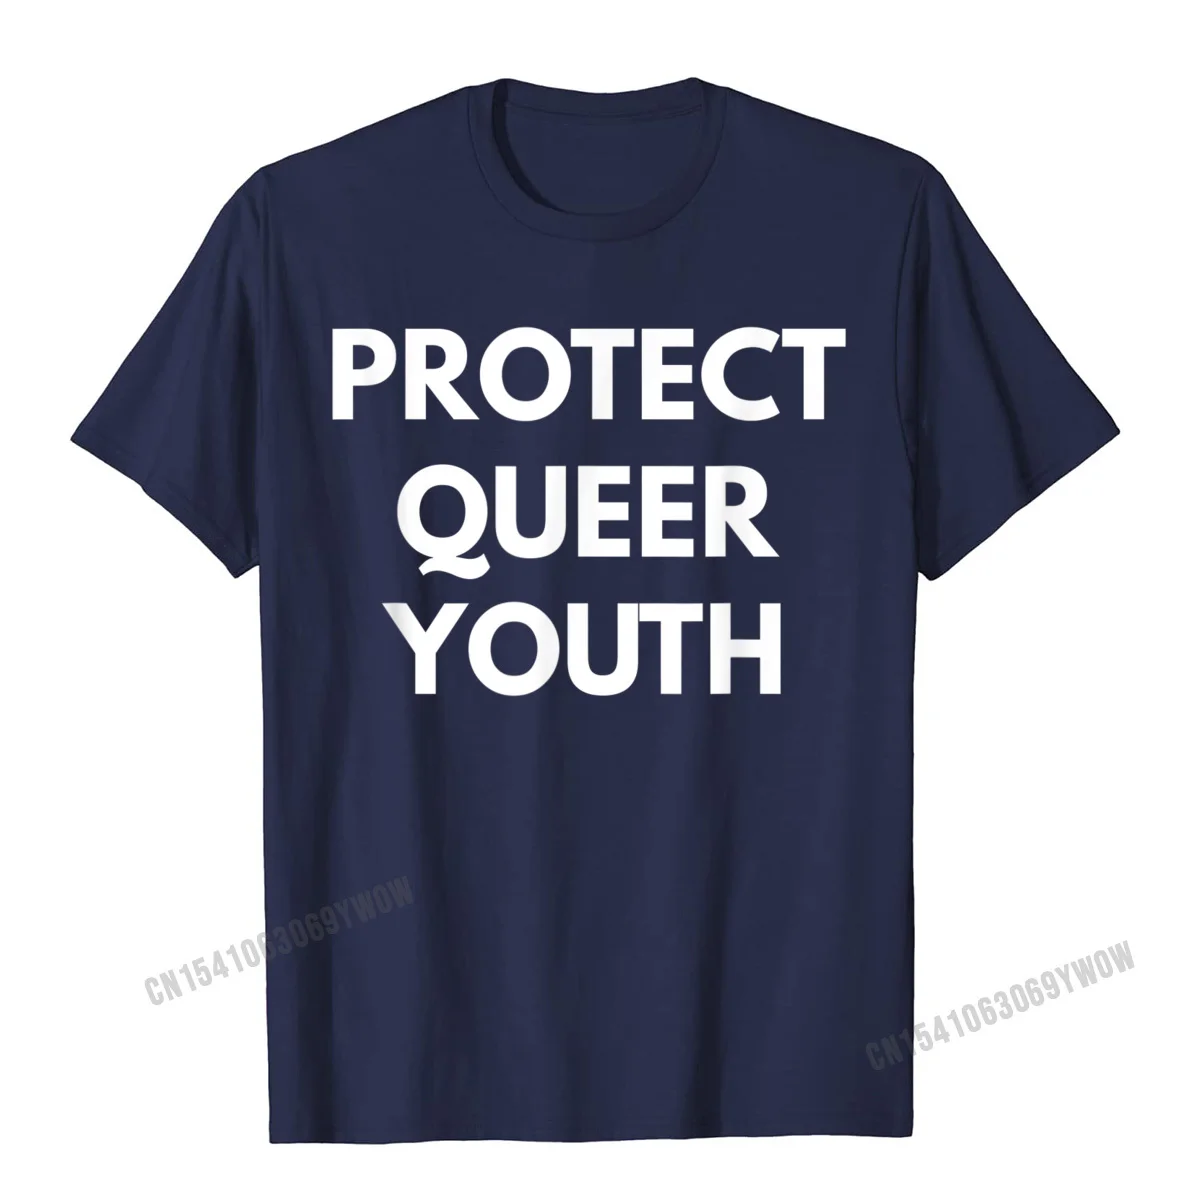 Tops & Tees Summer Tops Shirts Thanksgiving Day Prevailing Slim Fit Short Sleeve Pure Cotton Crew Neck Men Top T-shirts Slim Fit Protect Queer Youth t-shirt - LGBT Pride Shirts__403 navy